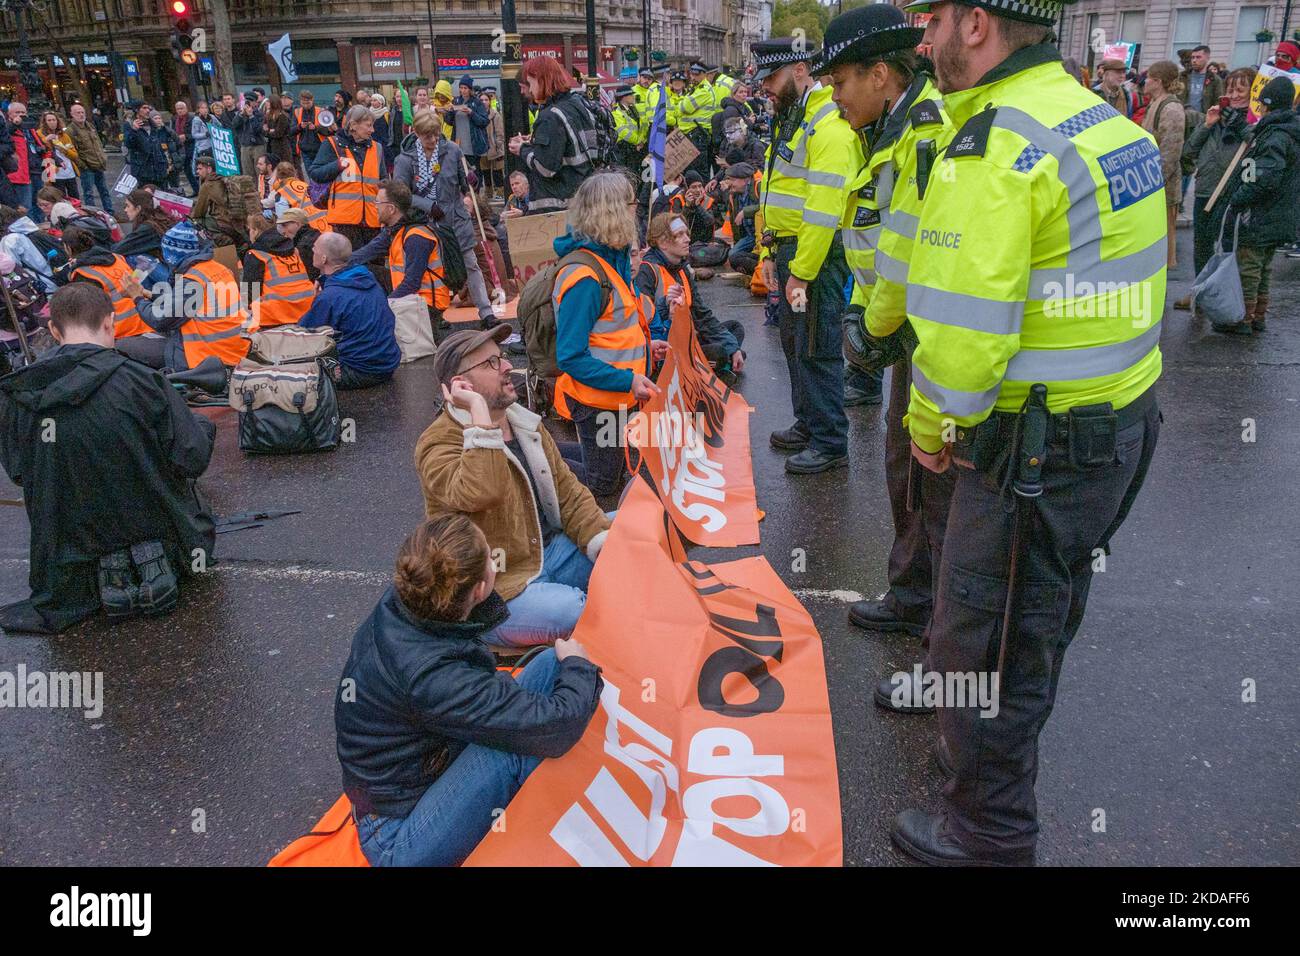 London, UK. 5 Nov 2022. Police tell Stop Oil protesters sitting down at Trafalgar Square after a short march to Piccadilly Circus that they are commiting an offence and may be arrested. After a few minutes they all got up and moved away.  Peter Marshall/Alamy Live News Stock Photo